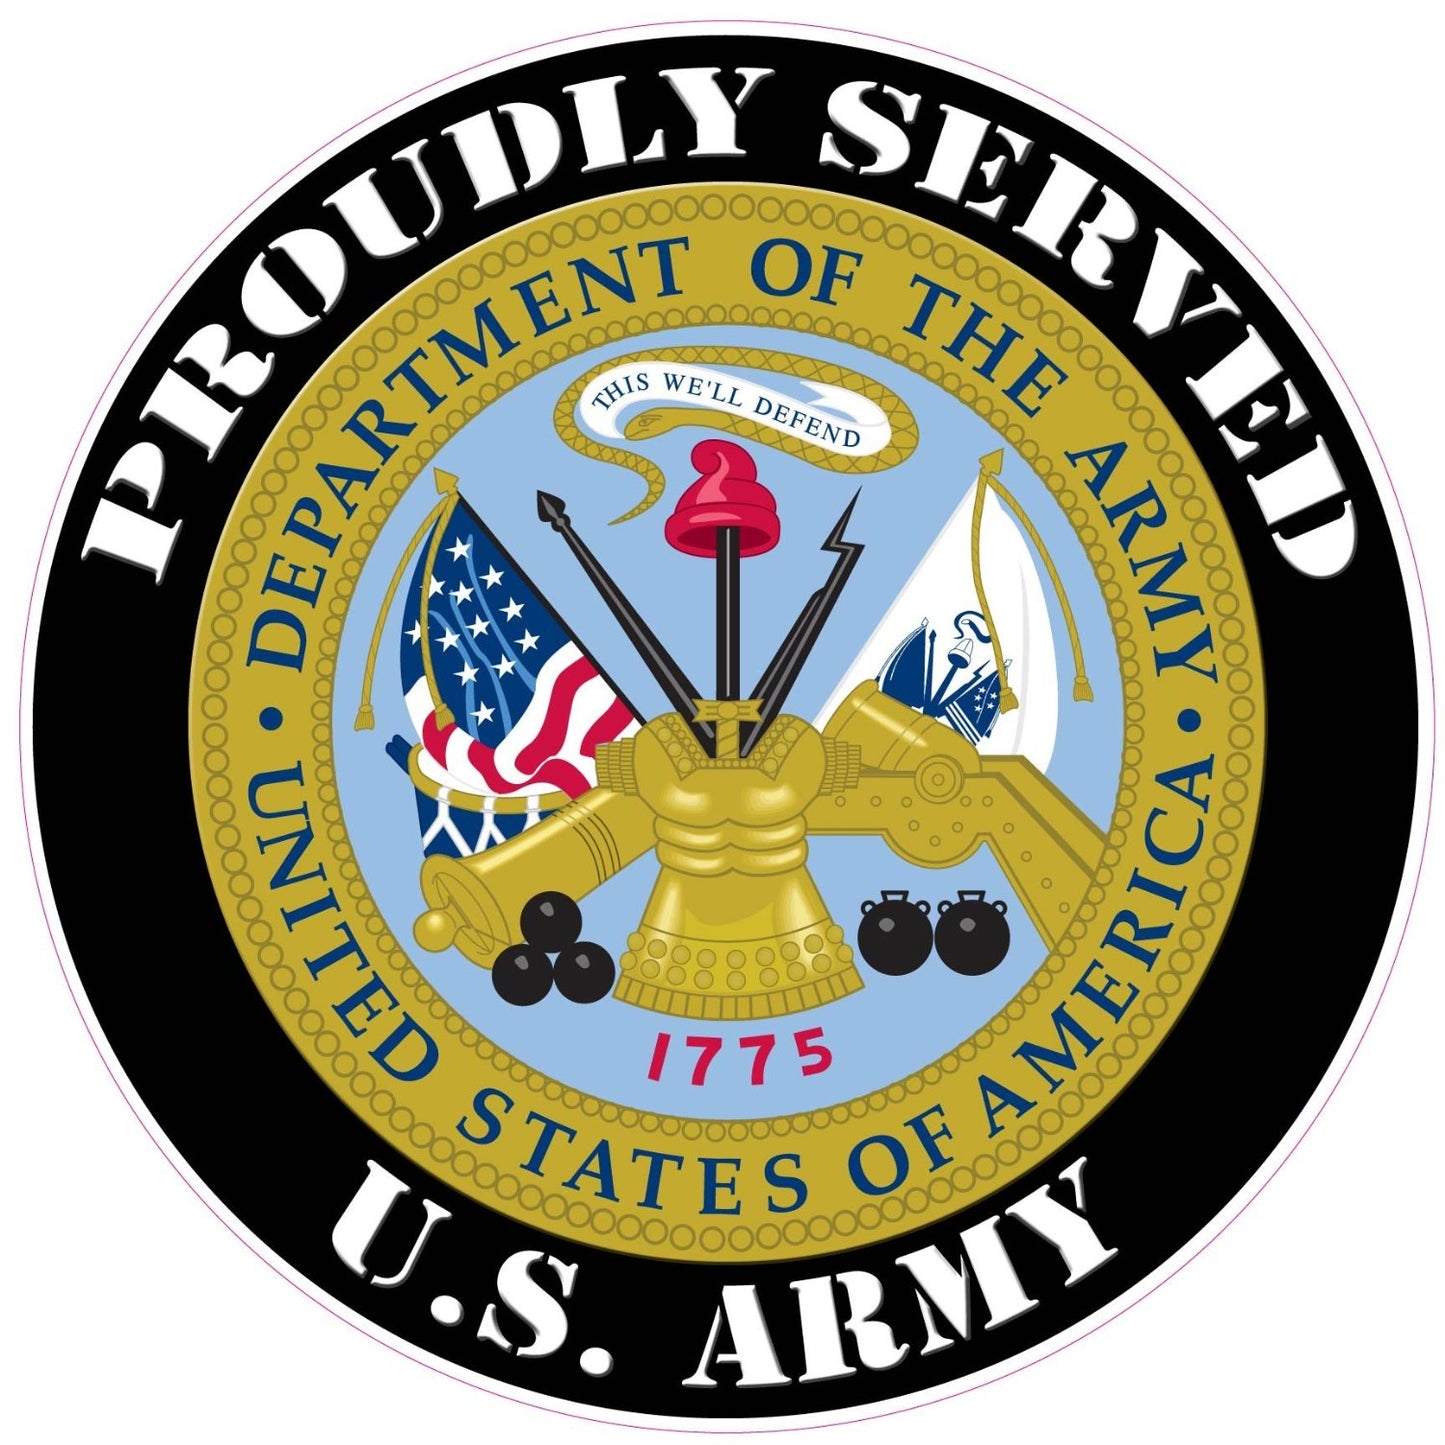 Proudly Served U.S. Army Decal - armed forces stickers, automotive decals, automotive stickers, bumper decals, bumper stickers, decals, Military and Veterans Decals, Military decals, military stickers, Patriotic stickers, Proudly Served U.S. Army 5" Decal, vehicle decals, Vehicle stickers, window decal, window decals, window sticker, window stickers | American Patriots Decals | High Quality Military and Veterans Die-Cut Decals